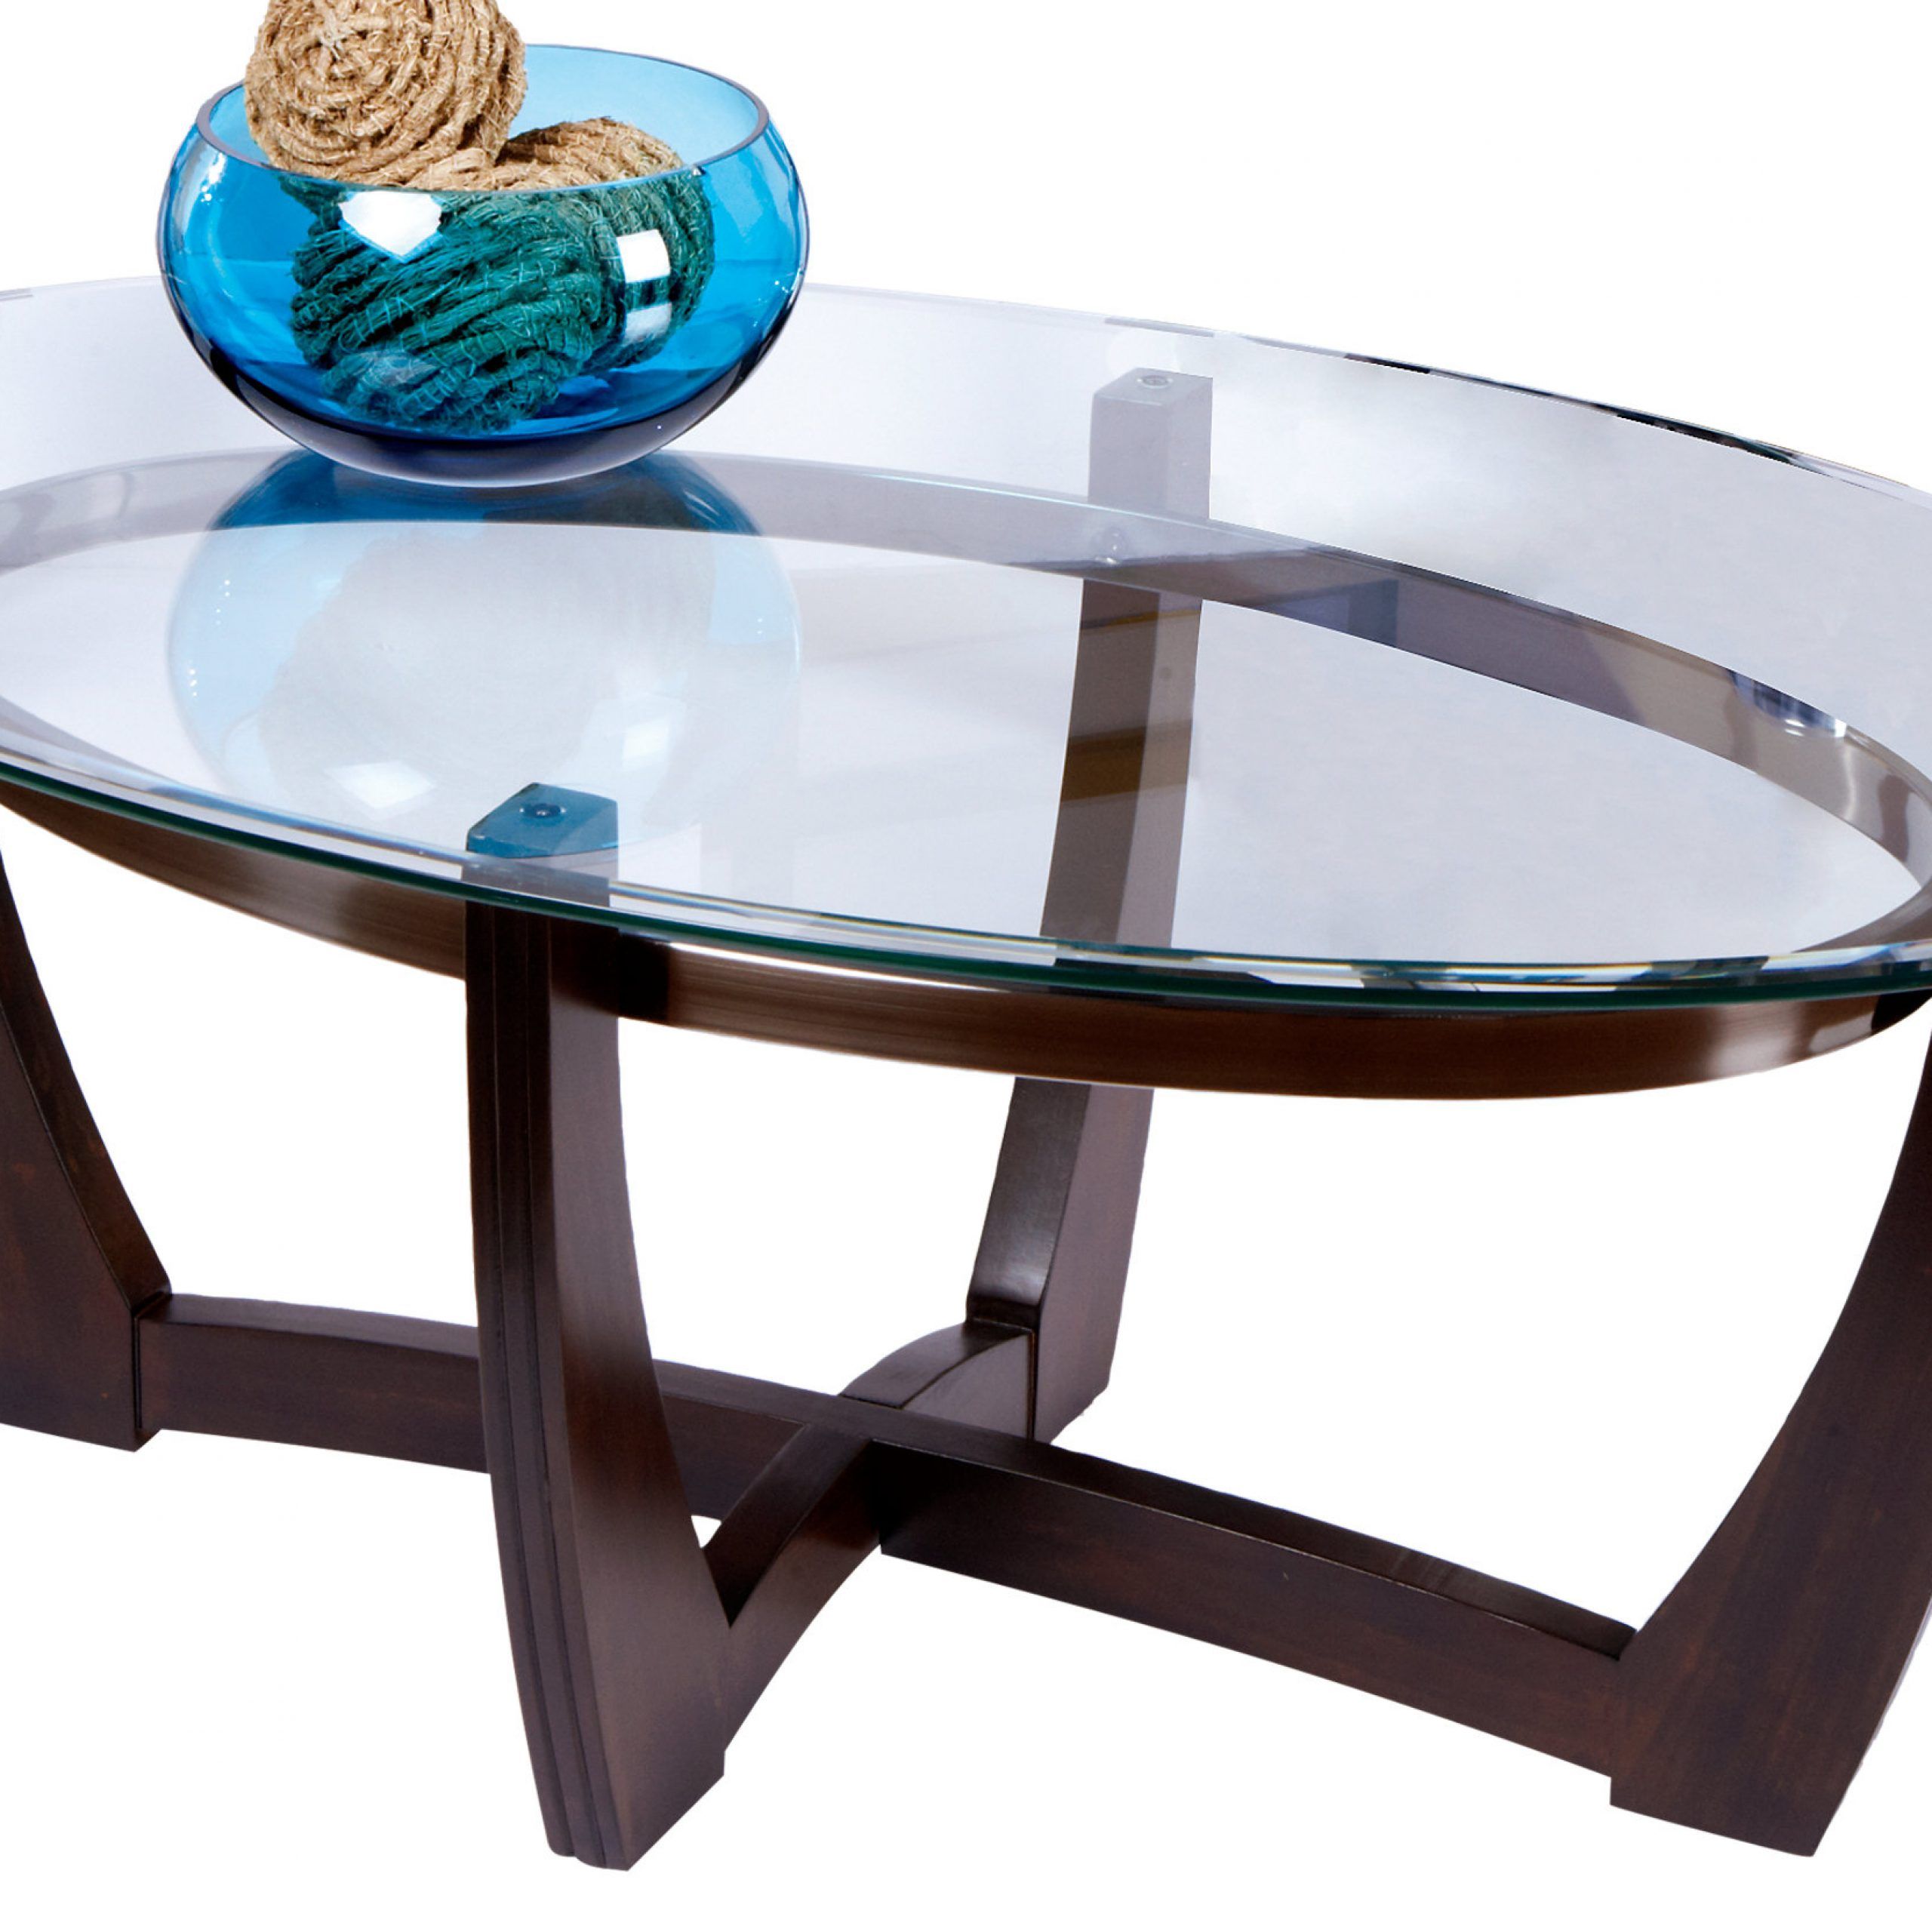 $159.99 – Haverhill Walnut (dark Brown) Cocktail Table Throughout Well Liked Dark Coffee Bean Cocktail Tables (Gallery 2 of 20)